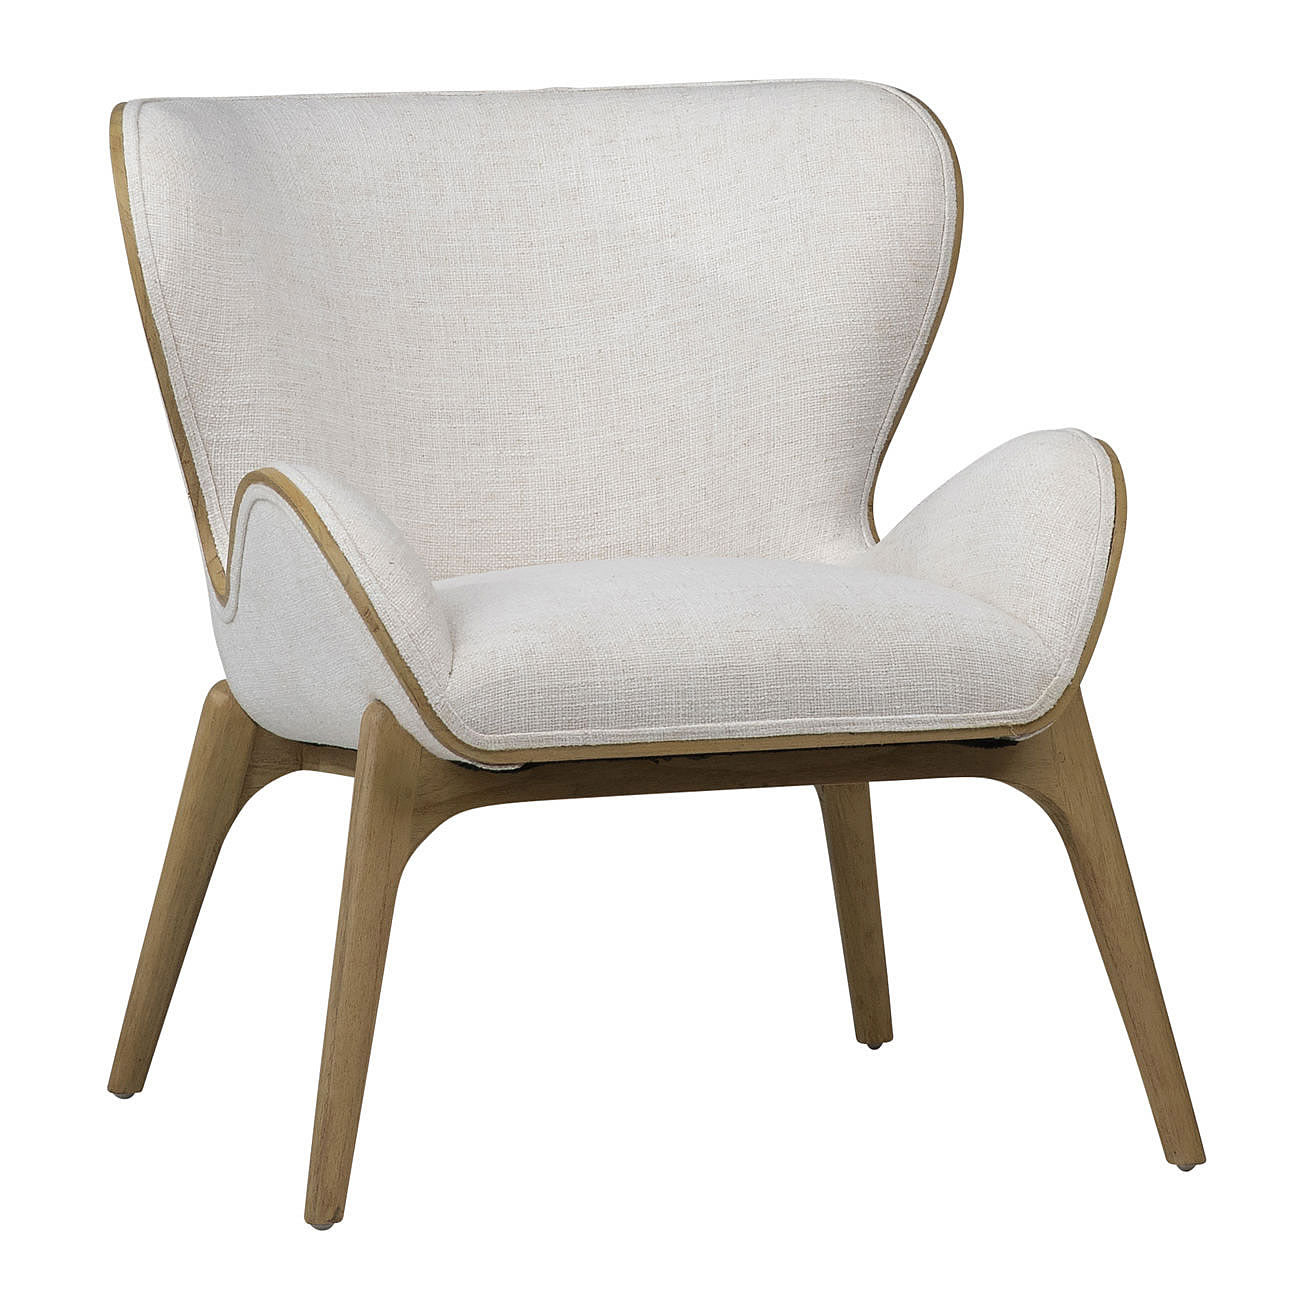 Avayanna Occasional Chair in Mindy Wood & Poly Blend Upholstery Hollywood